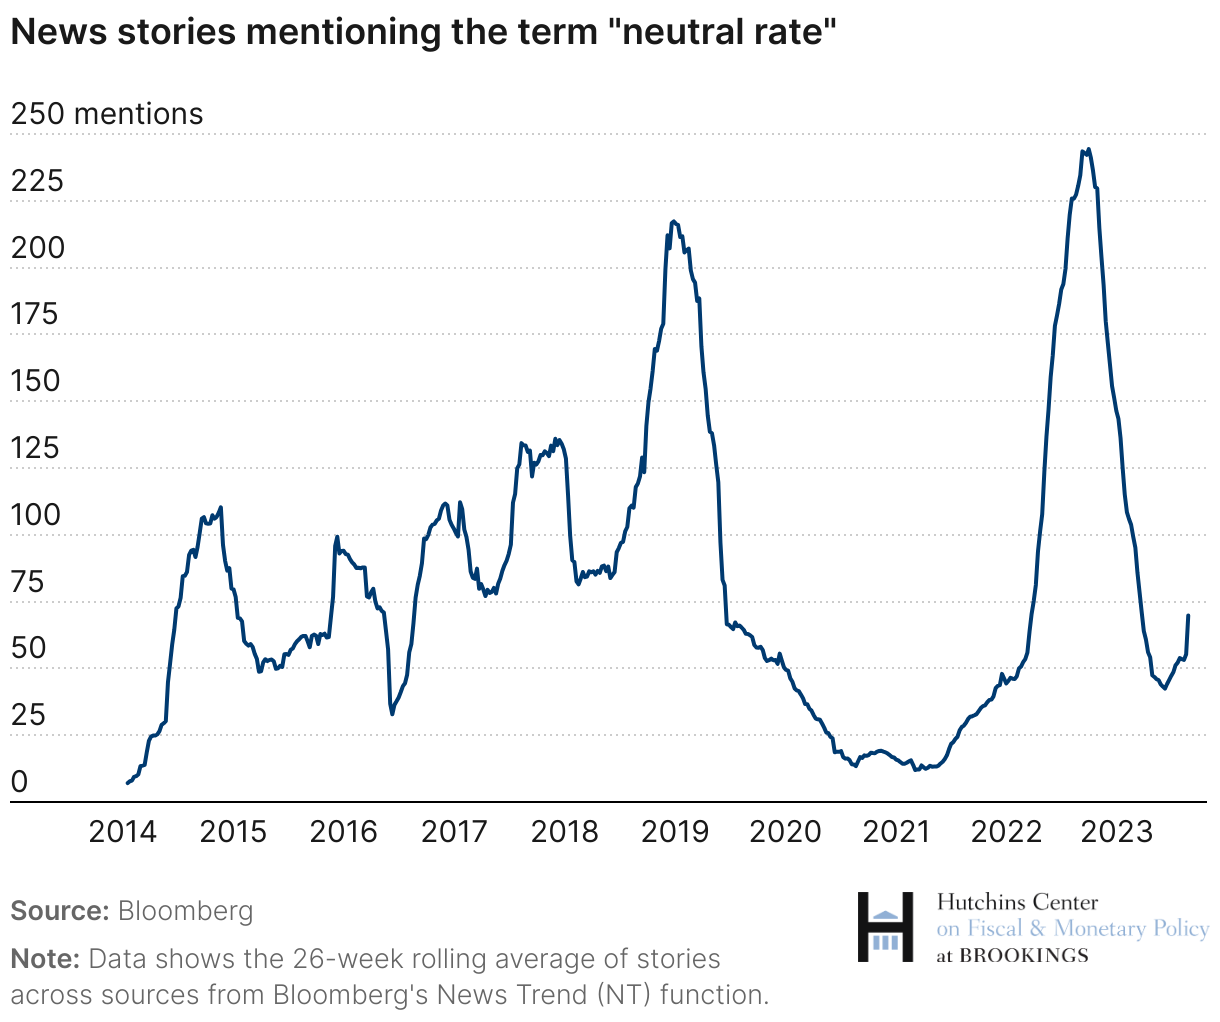 Use of the term "neutral rate" has varied between less than 10 mentions per day to over 230. 